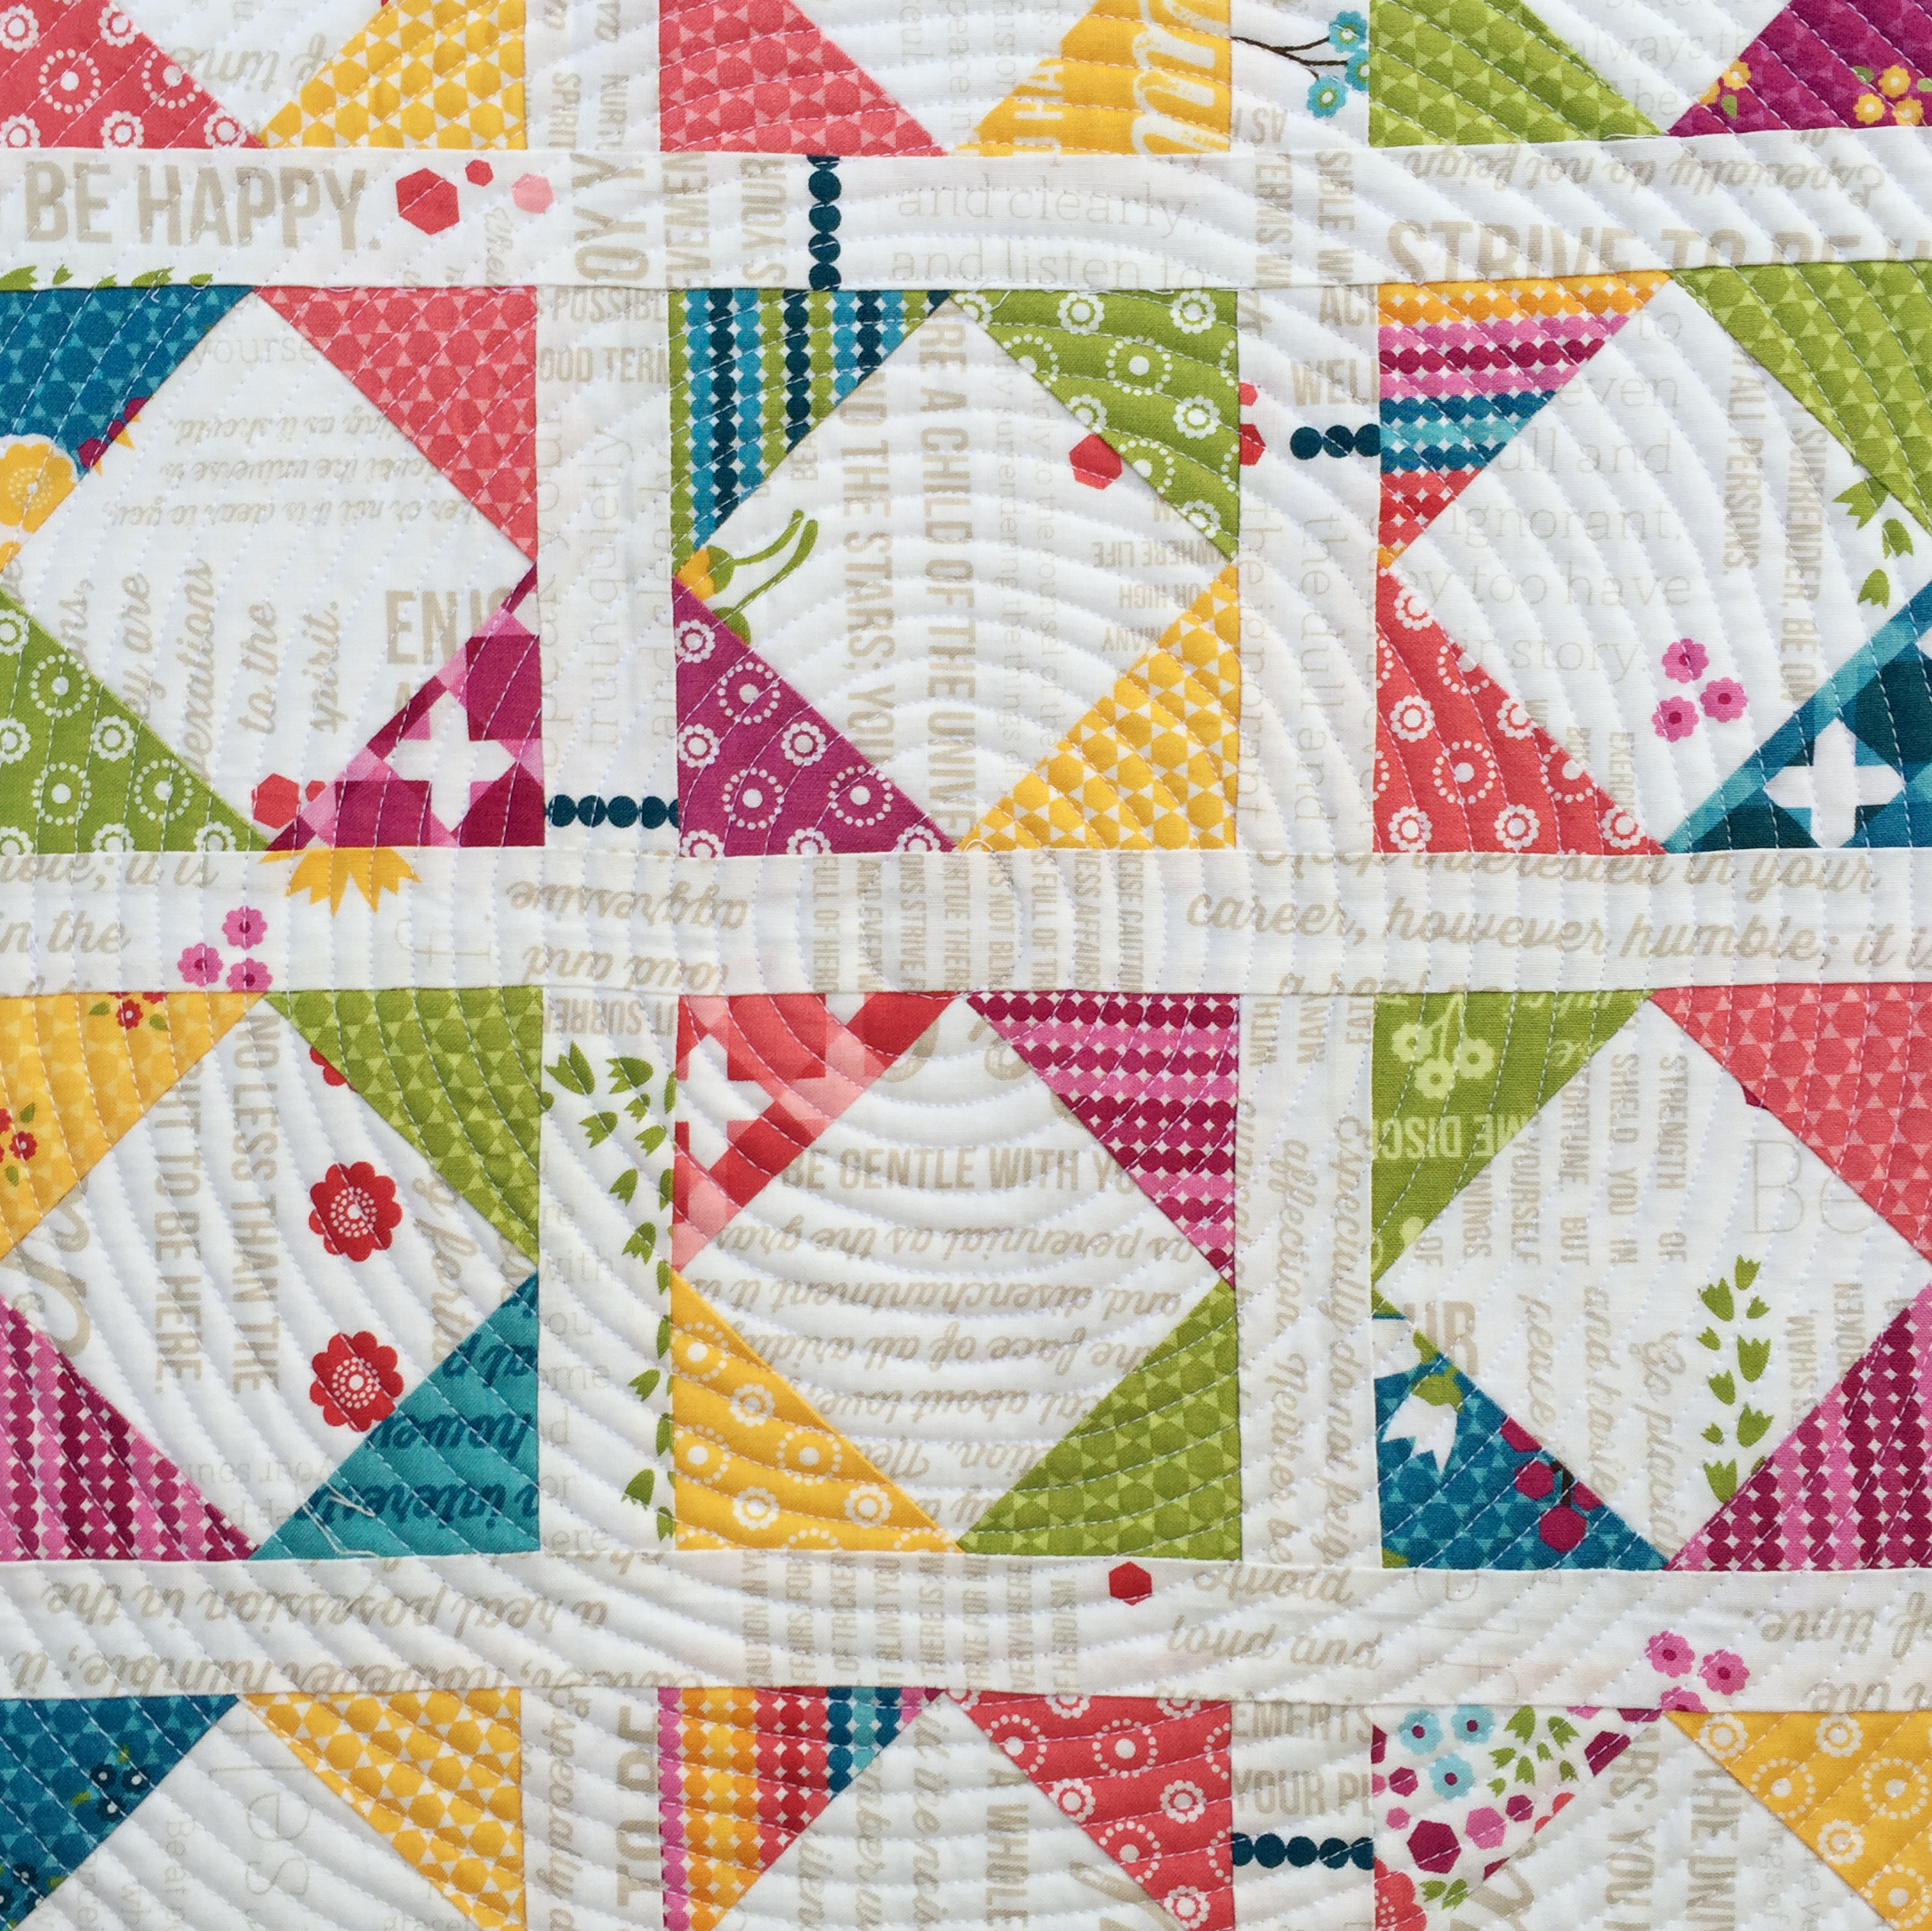 Second Grade Quilt by April Rosenthal from the book Precut Primer by Barb and Mary of Me and My Sister Designs www.aprilrosenthal.com